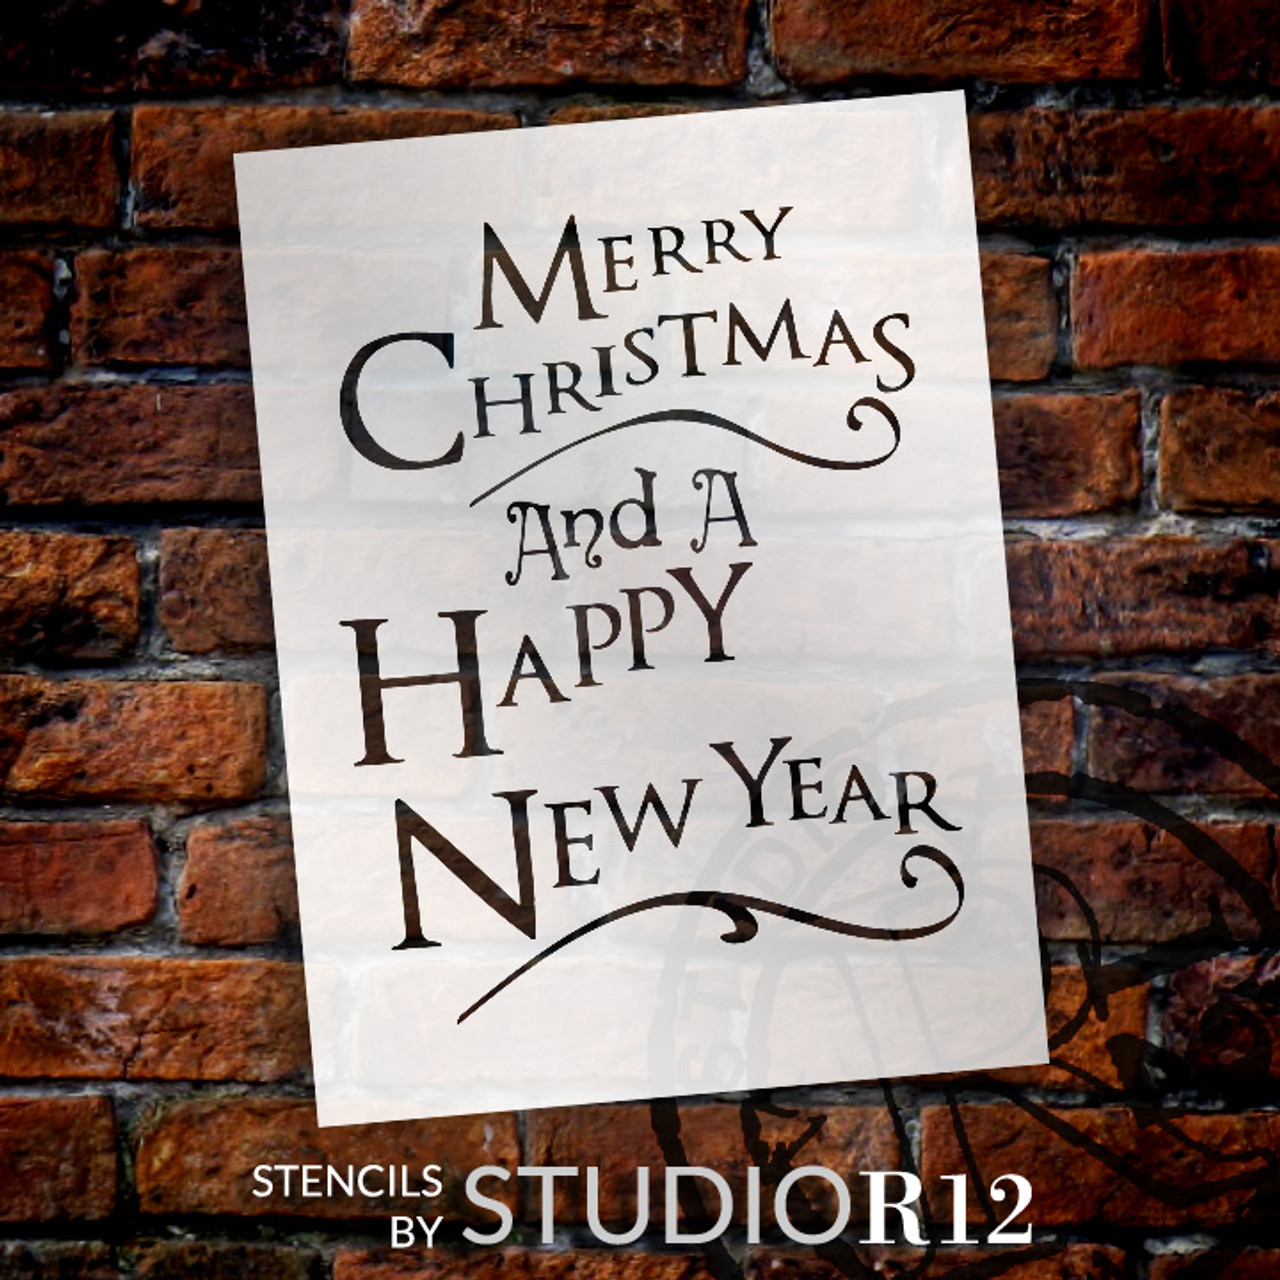 Merry Christmas And Happy New Year - Festive - Word Art Stencil - 16" x 20" - STCL2085_3 - by StudioR12